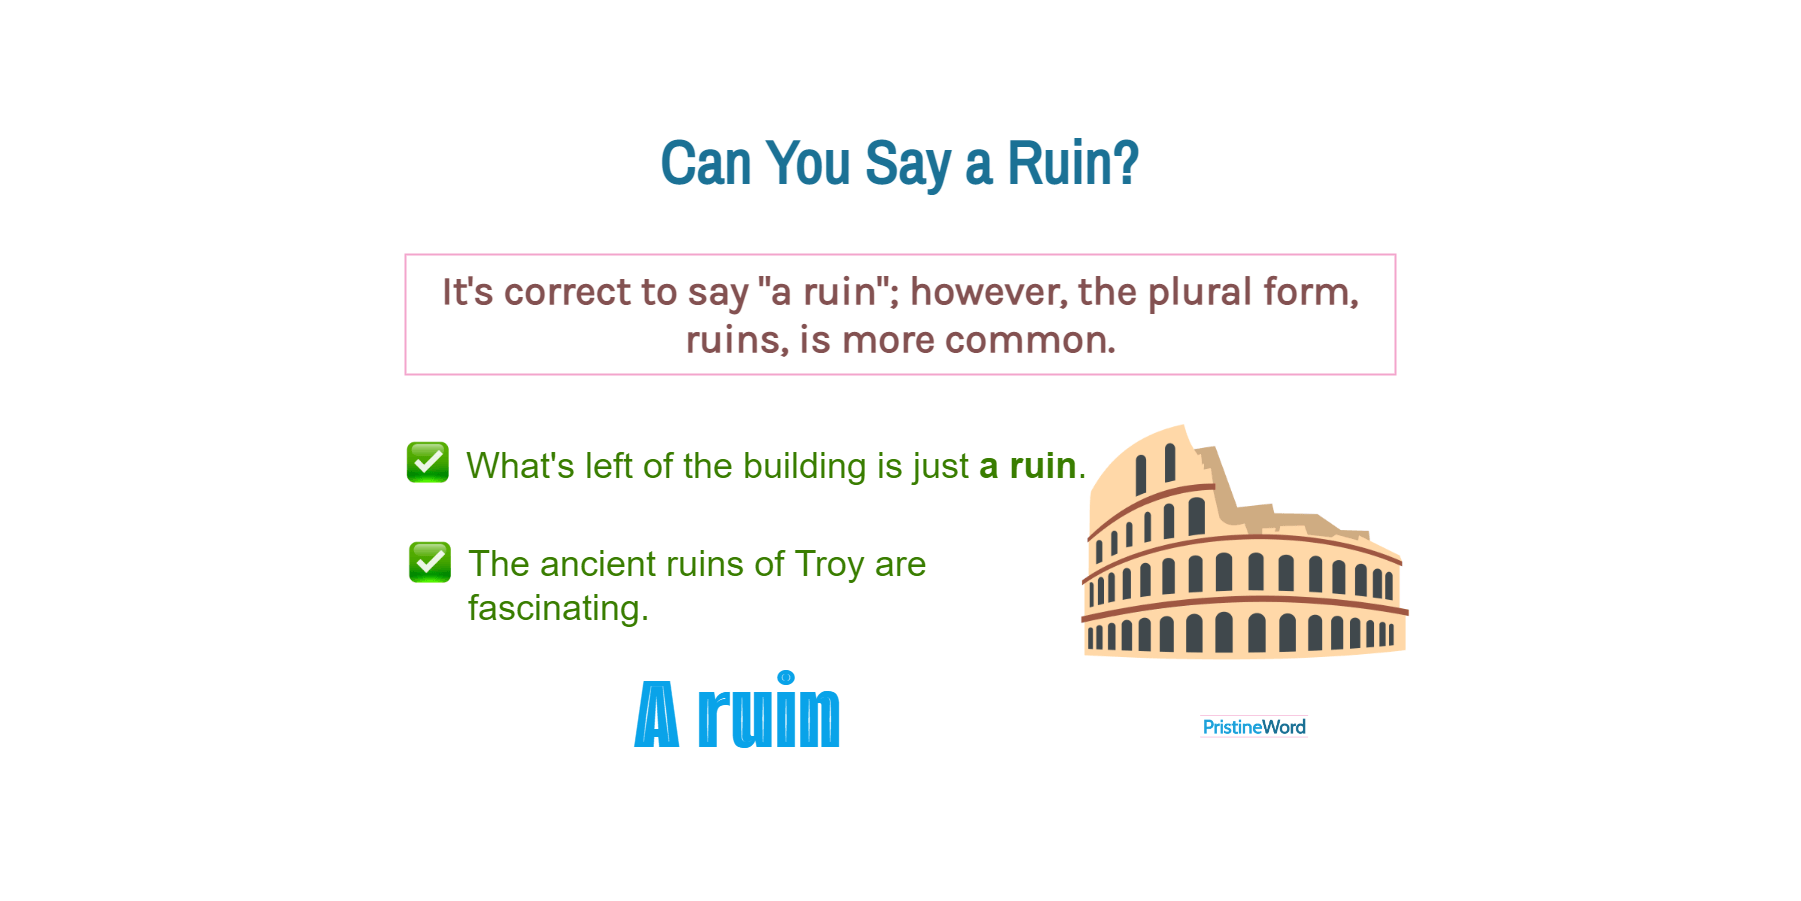 Can You Say 'a Ruin'?